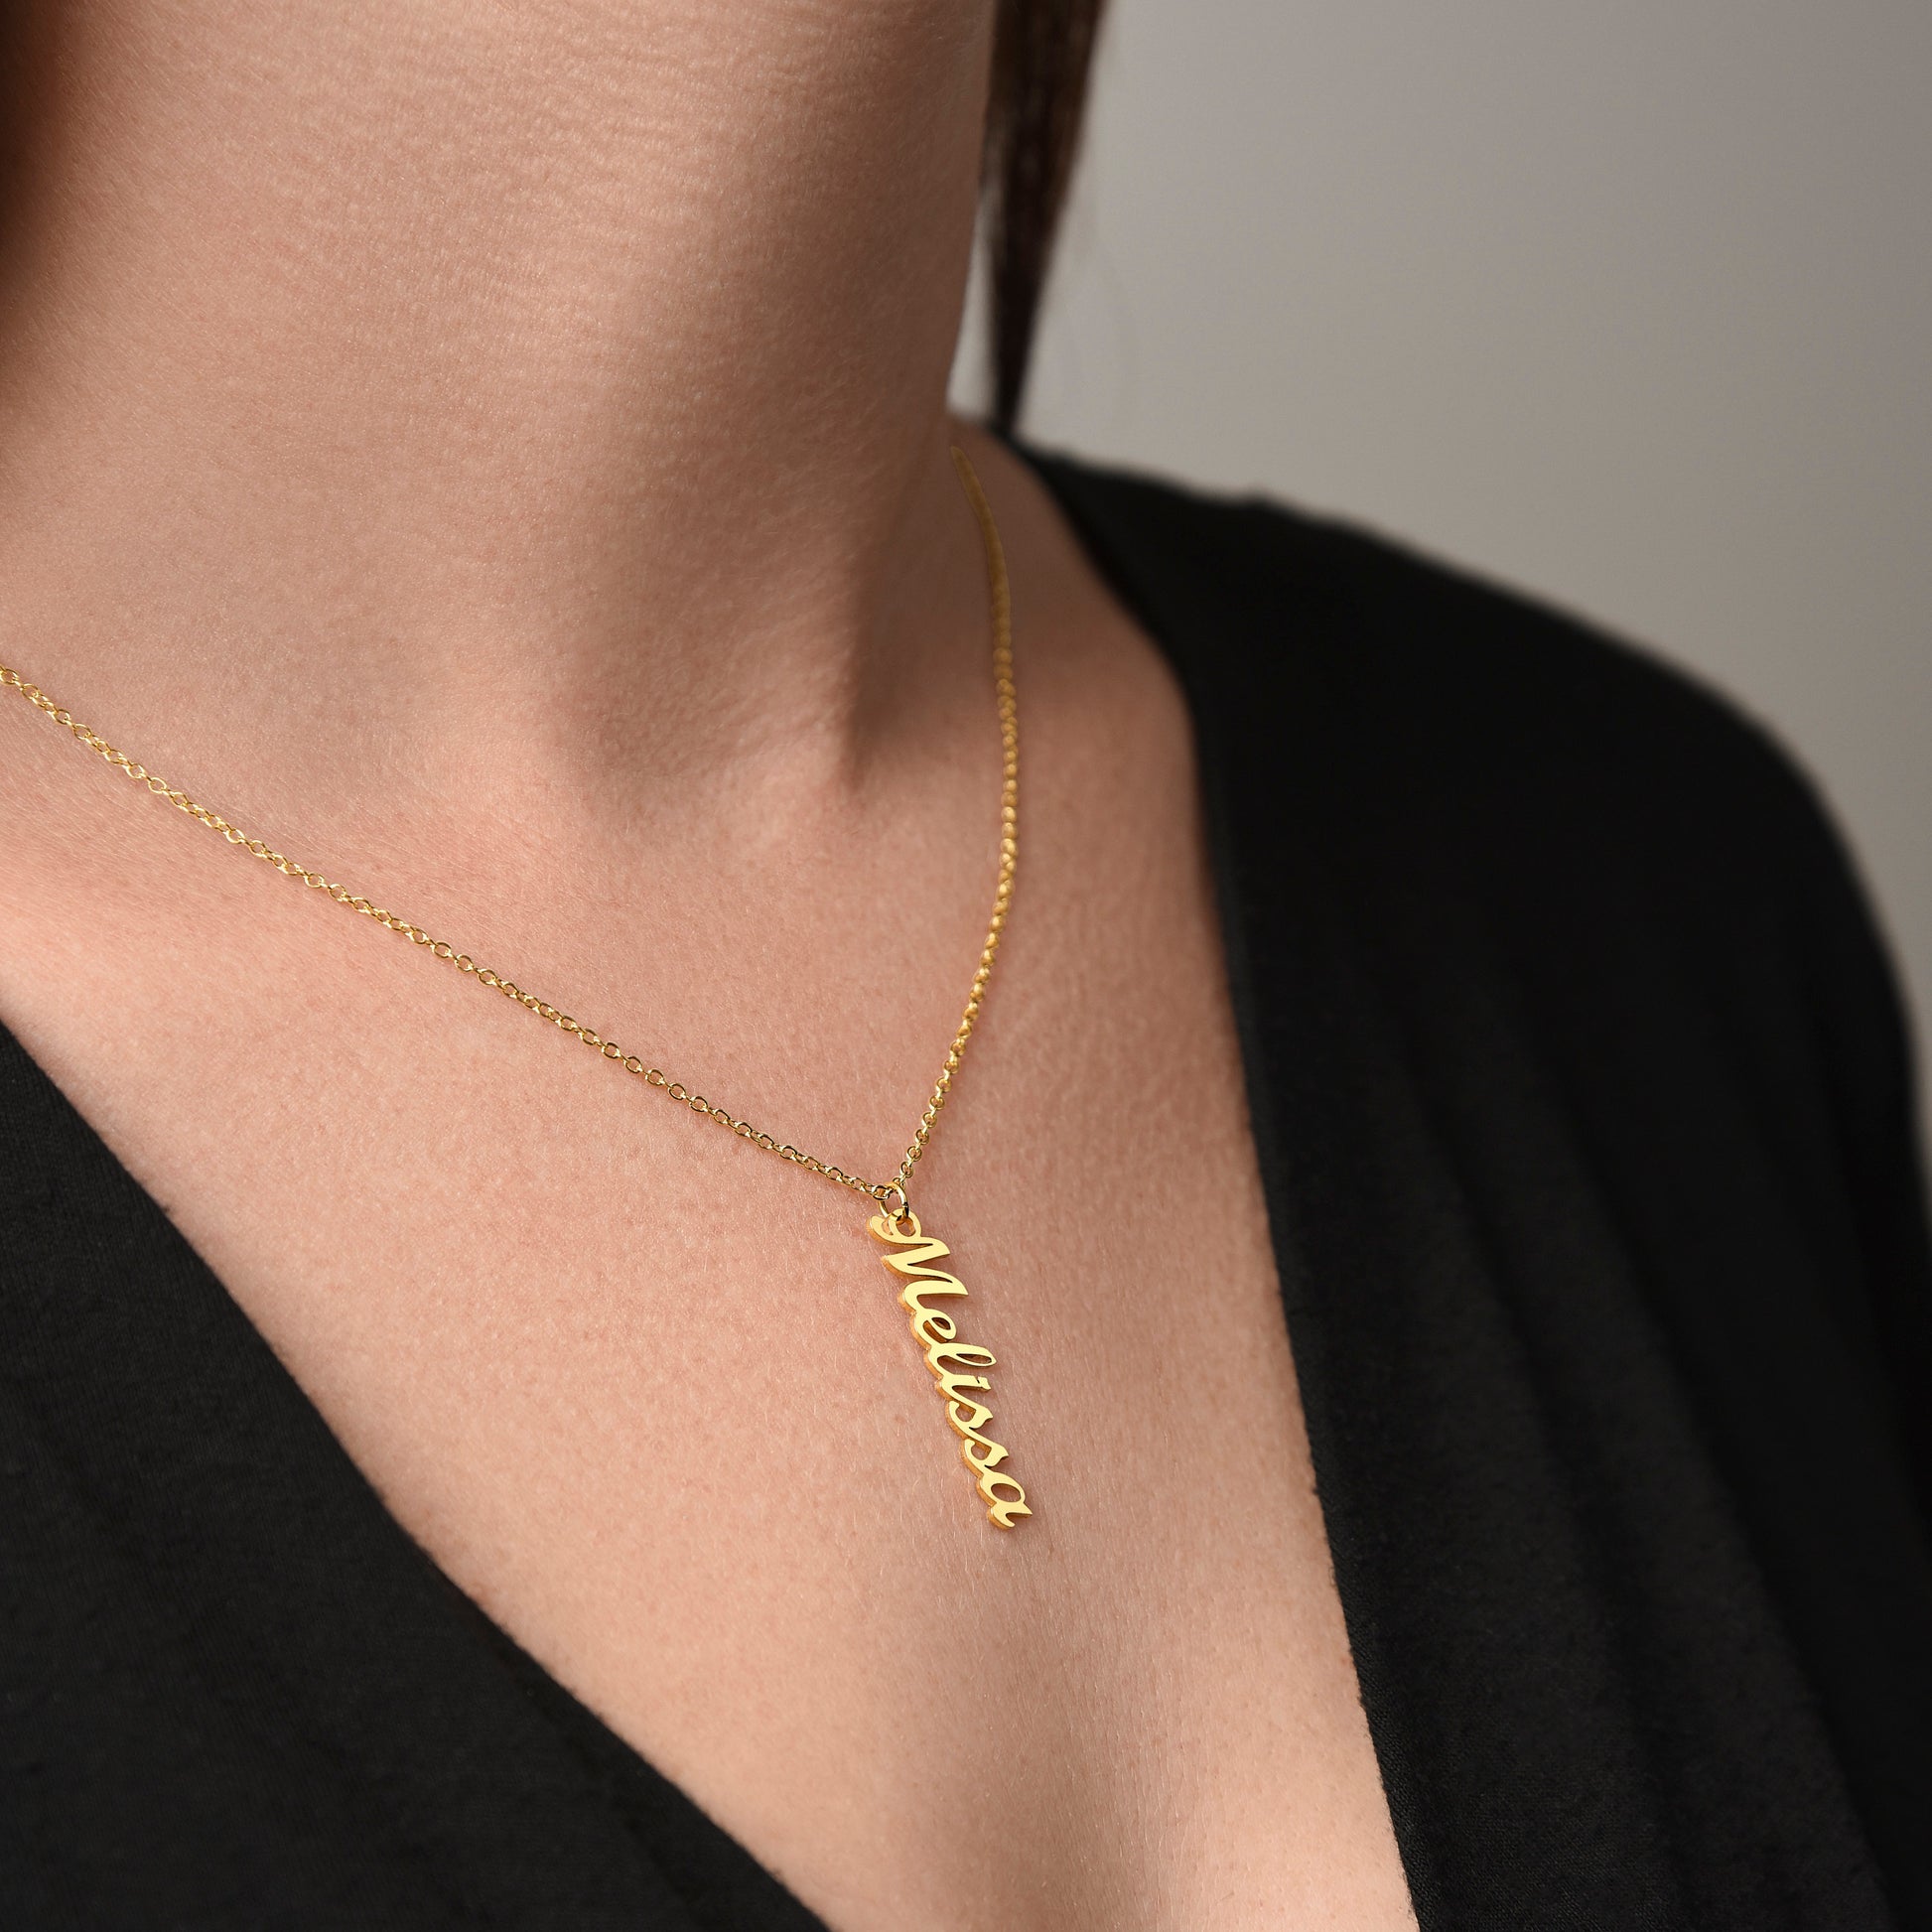 13th Birthday Necklace, Script Name Necklace, Stainless Steel or 18K Yellow Gold Finish, Birthday Gift for 13 Year Old Girl, Happy 13th Gold Finish